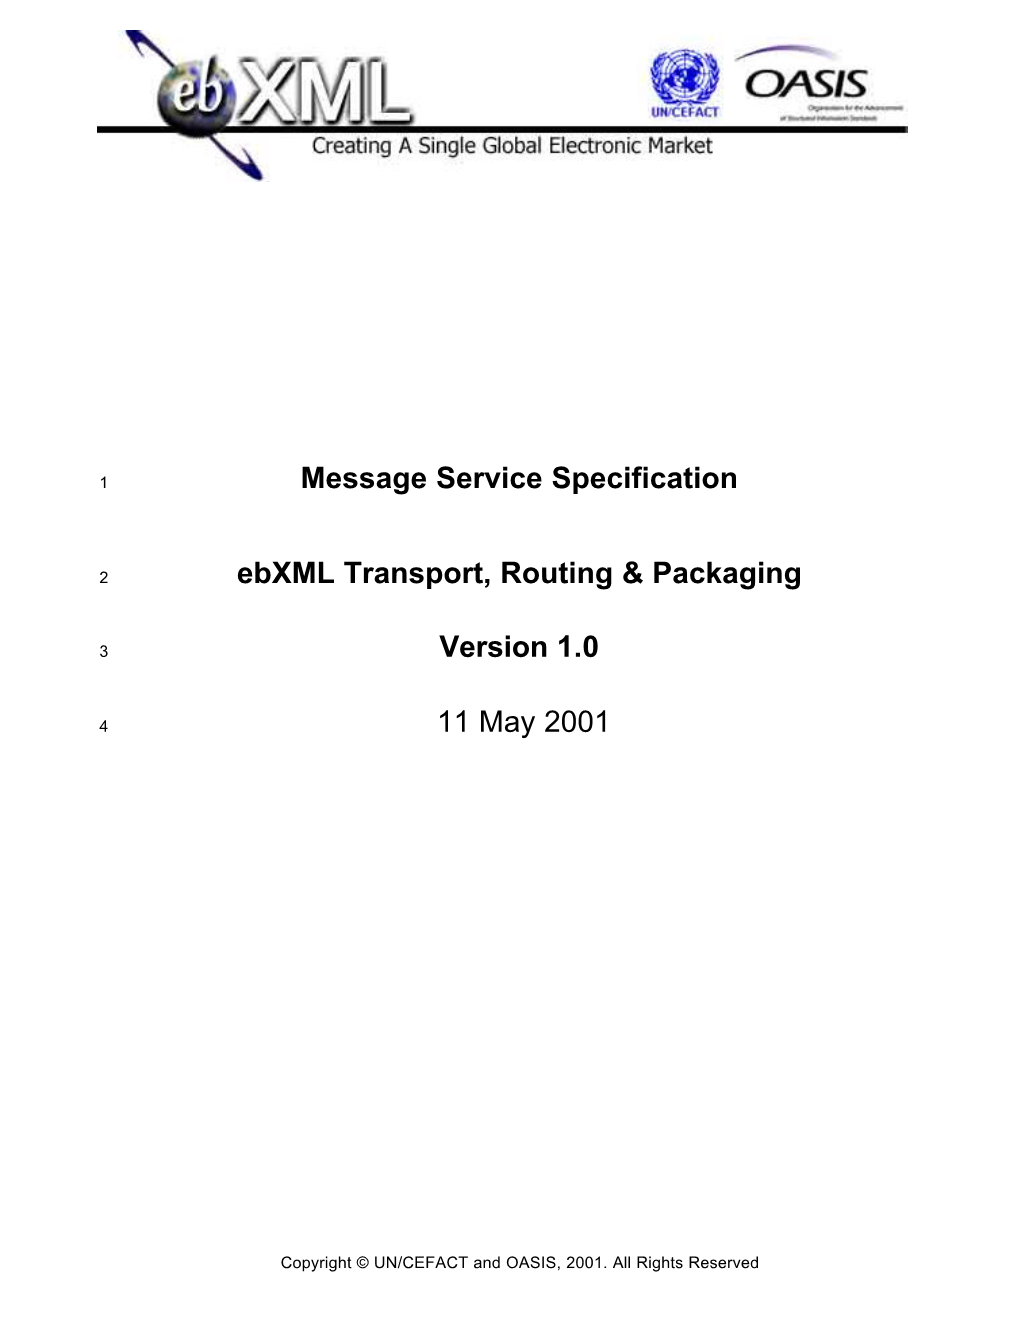 Message Service Specification Ebxml Transport, Routing & Packaging